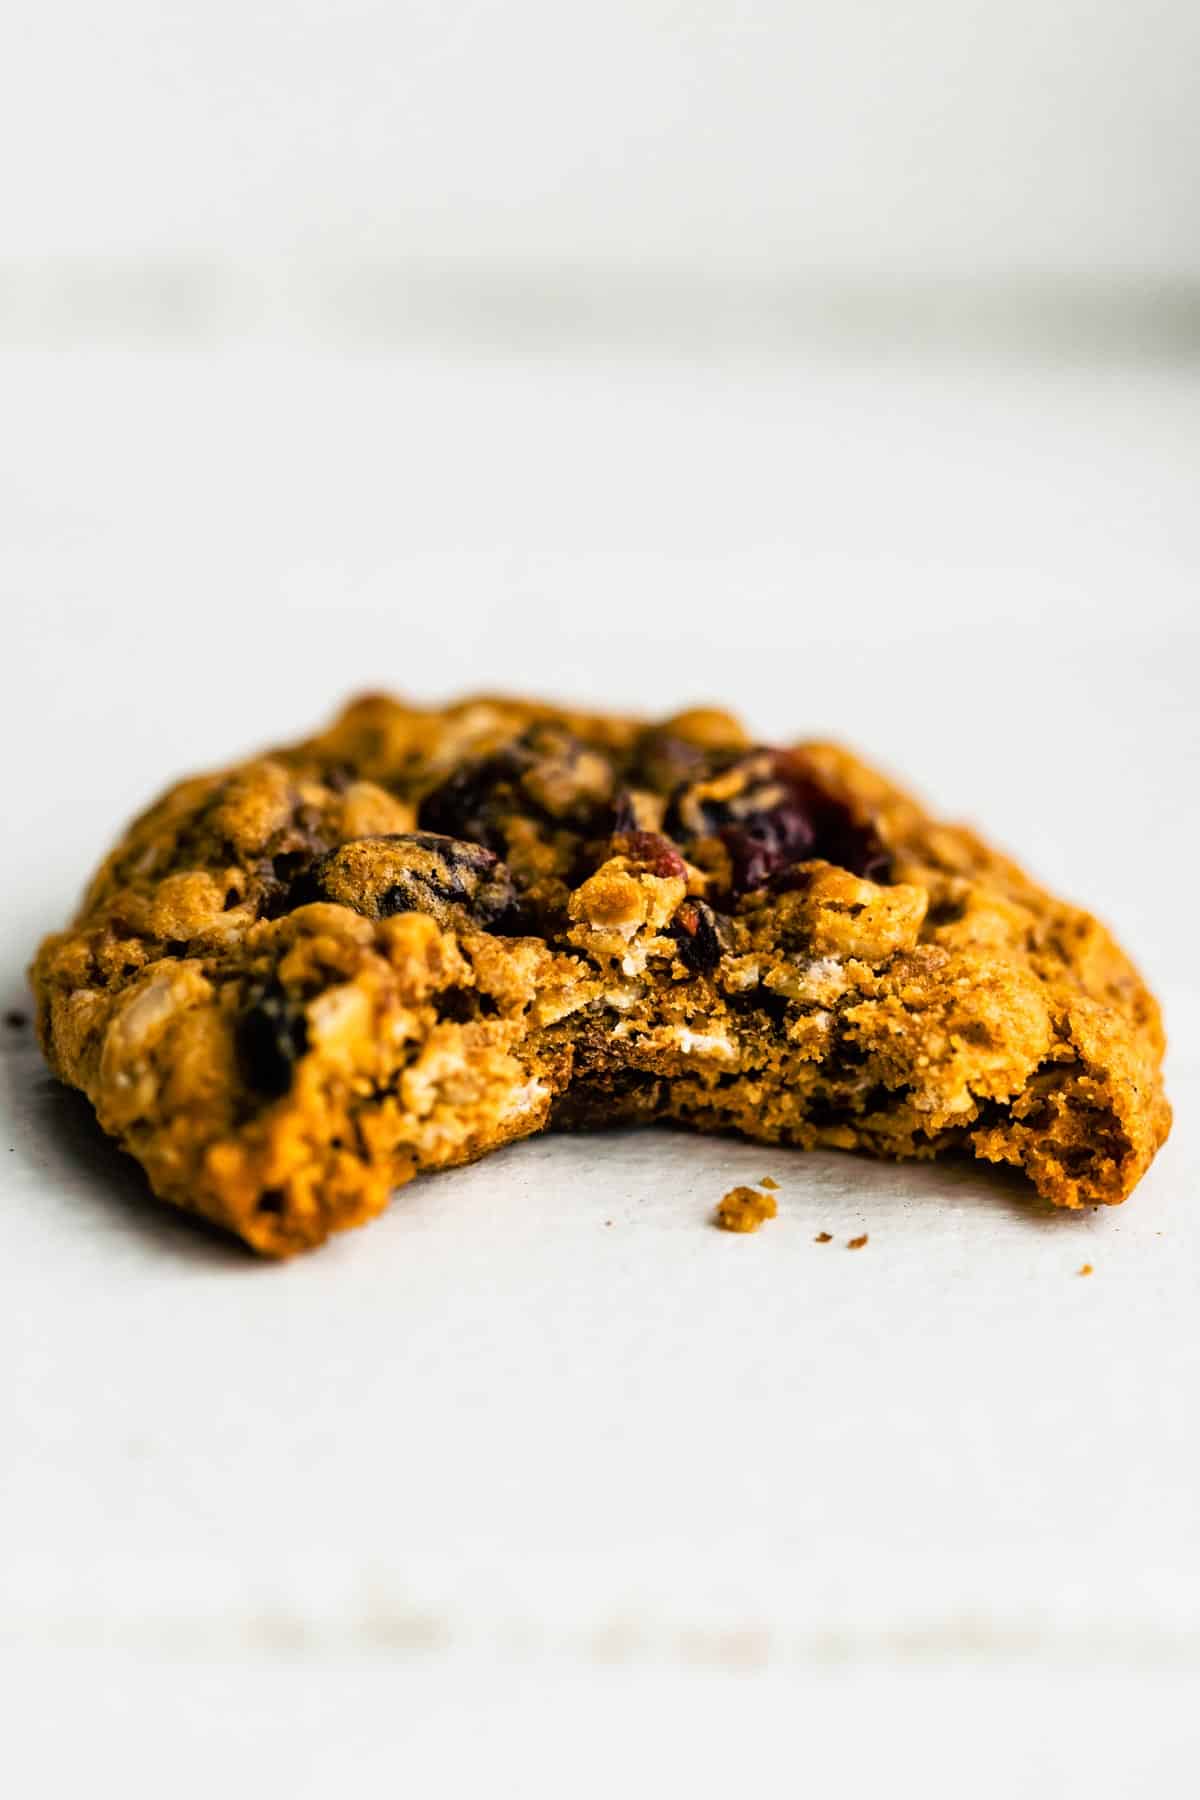 Up close photo of a gluten free oatmeal cookie with a bite removed.